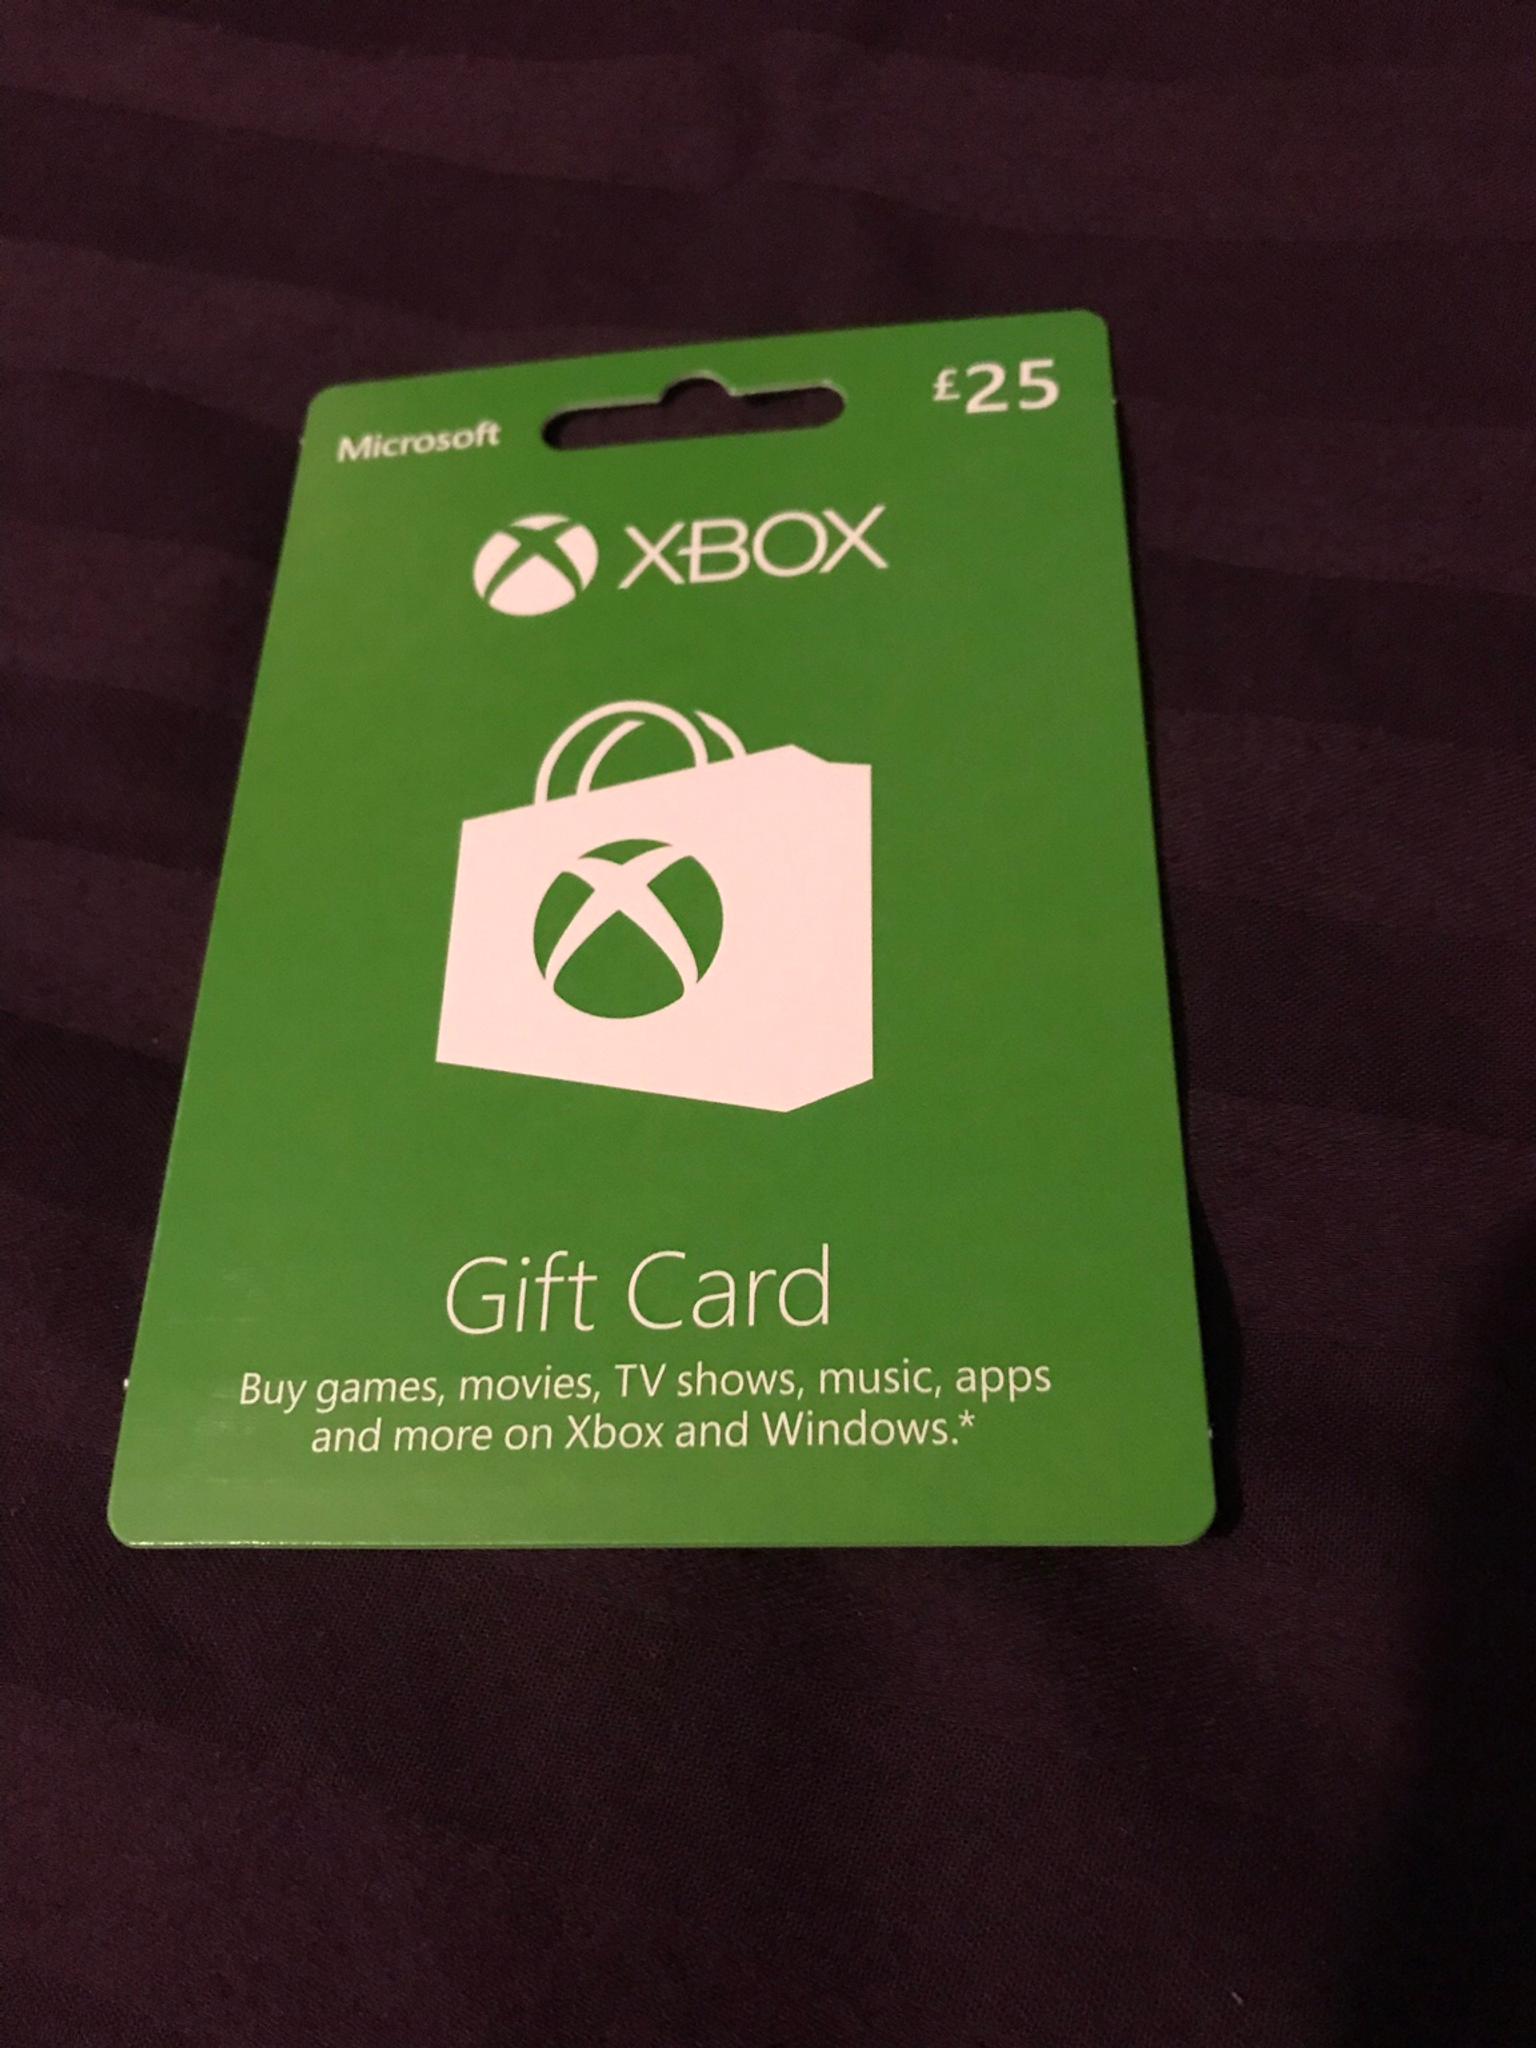 Xbox gift card 25 pound in SE20 London for £15.00 for sale